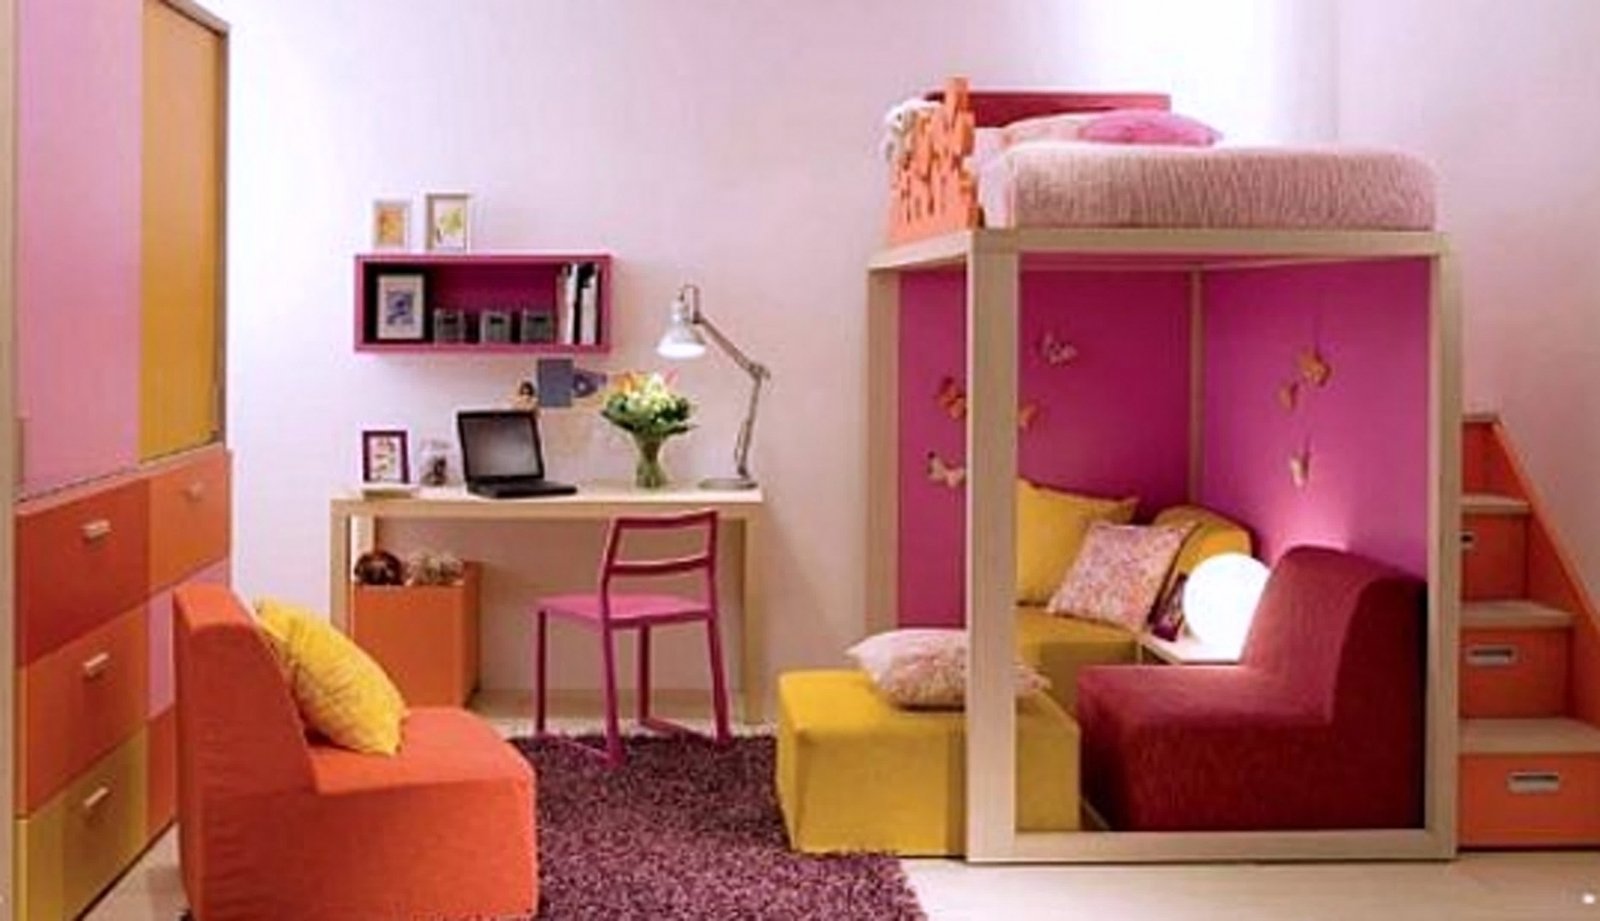 10 Most Recommended Small Bedroom Ideas For Teenage Girls girls small bedroom ideas for designs alluring decor ead teen 2022